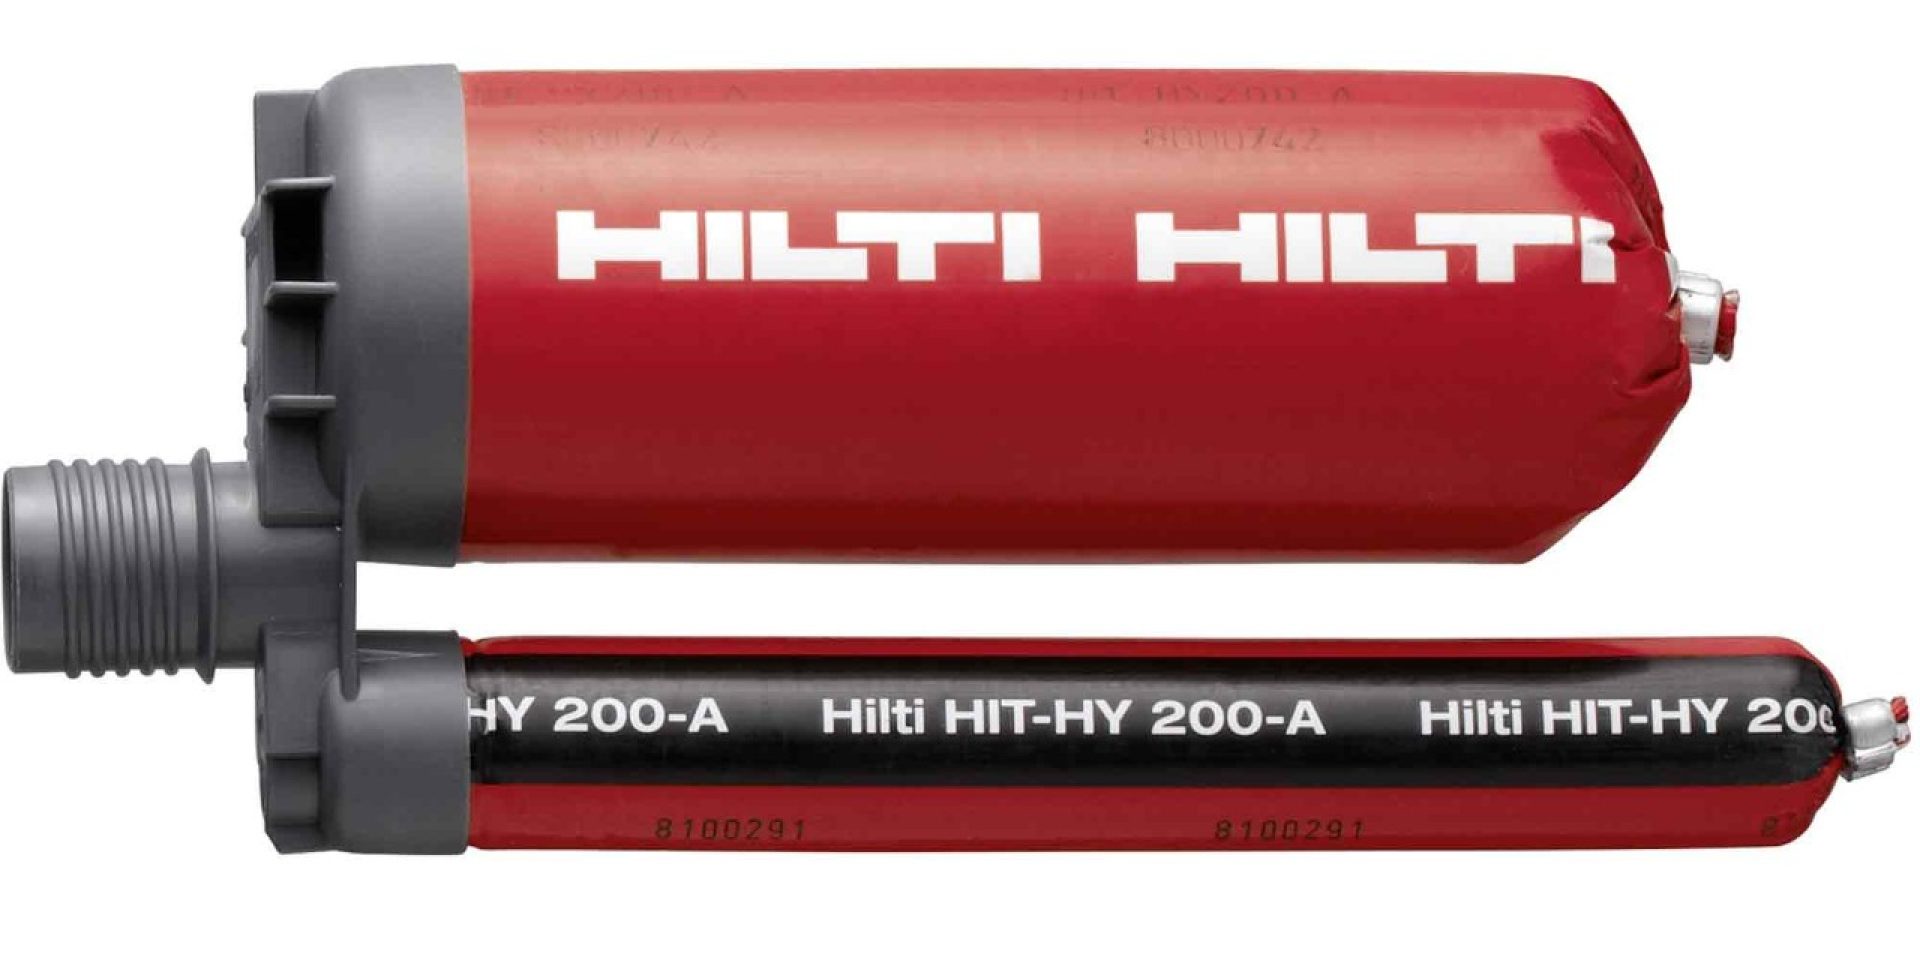 Hilti HIT-HY 200 chemisch ankersysteem